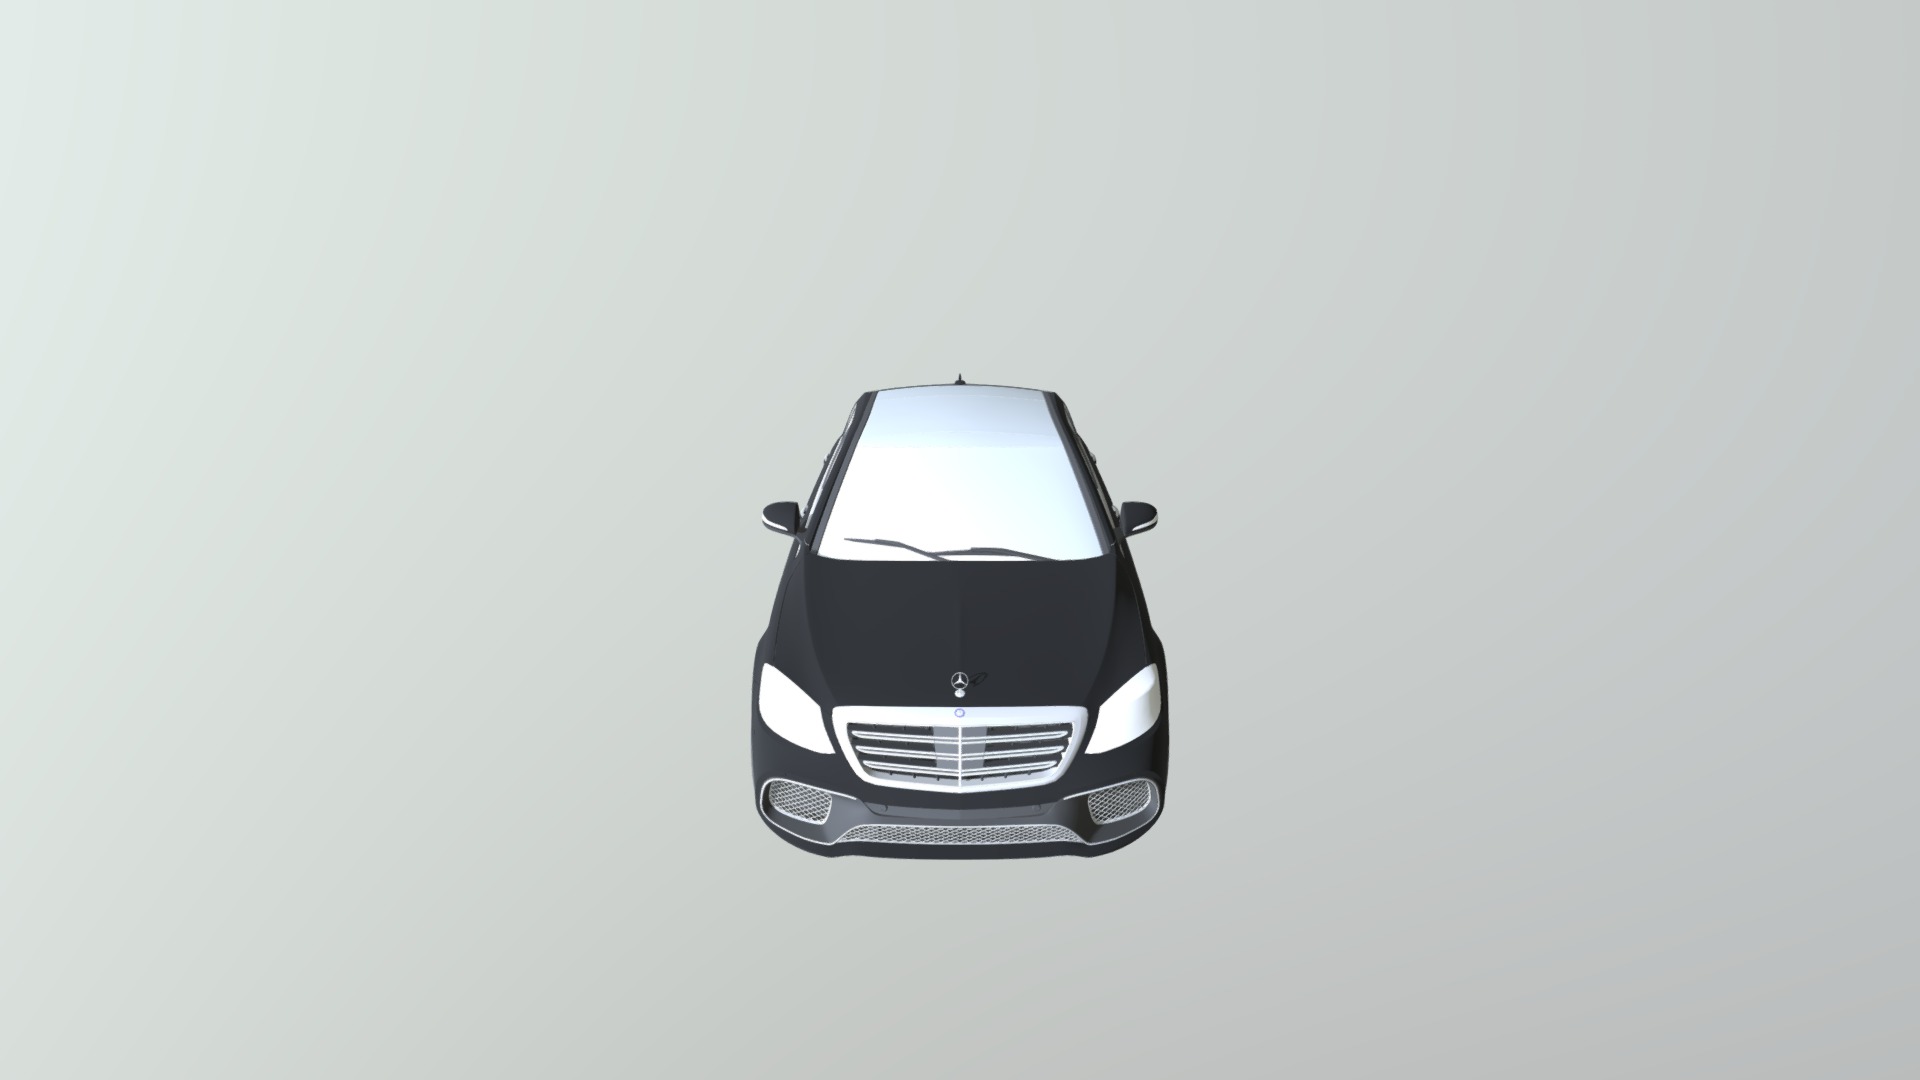 3D model Mercedes AMG S 65 V222 2018 Lang Fbx - This is a 3D model of the Mercedes AMG S 65 V222 2018 Lang Fbx. The 3D model is about a black car with a white background.